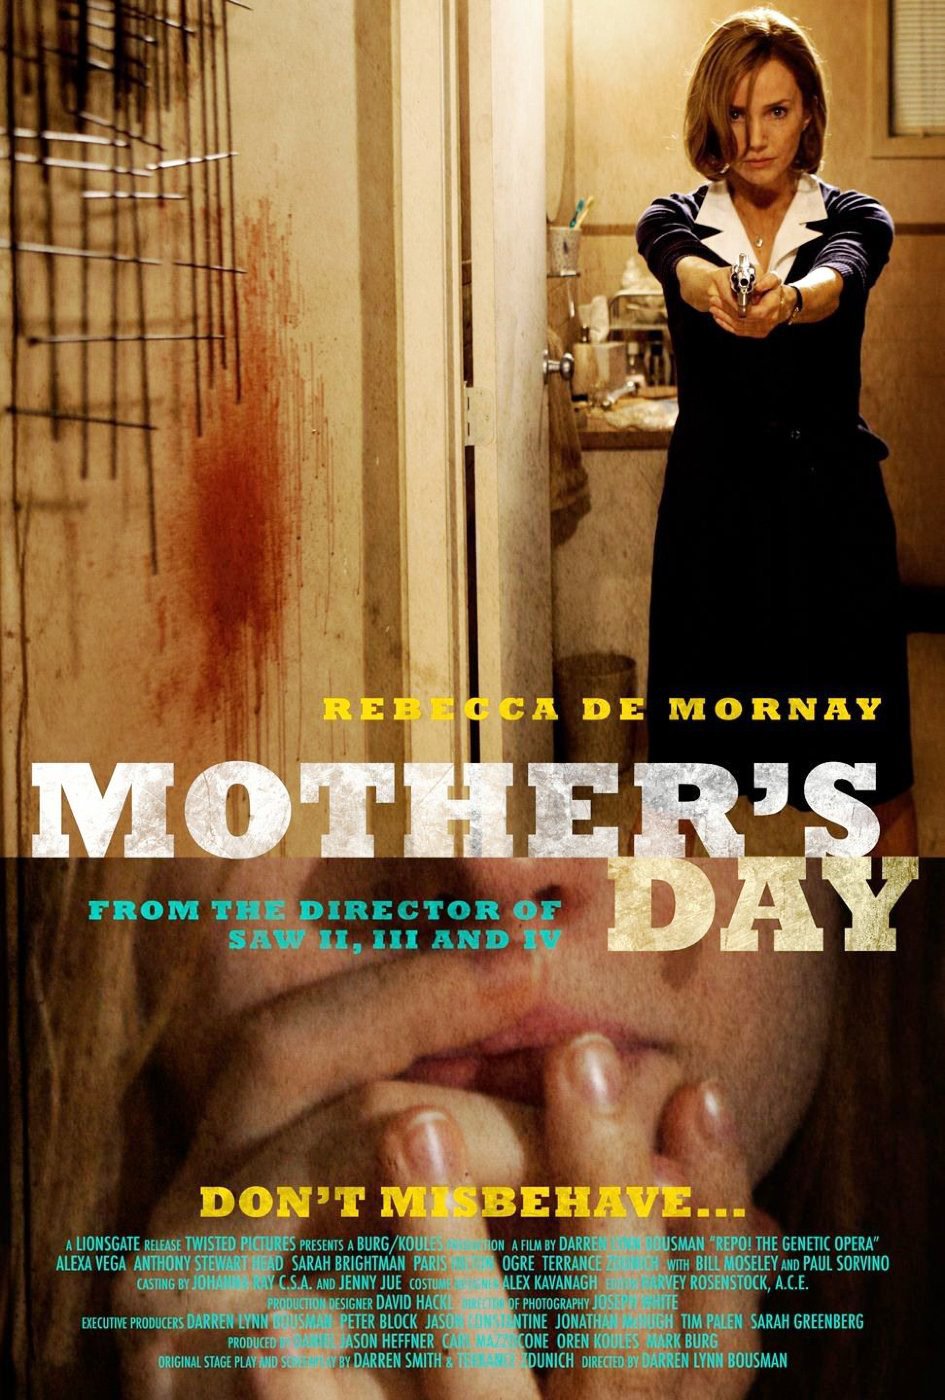 Poster of Anchor Bay Films' Mother's Day (2012)